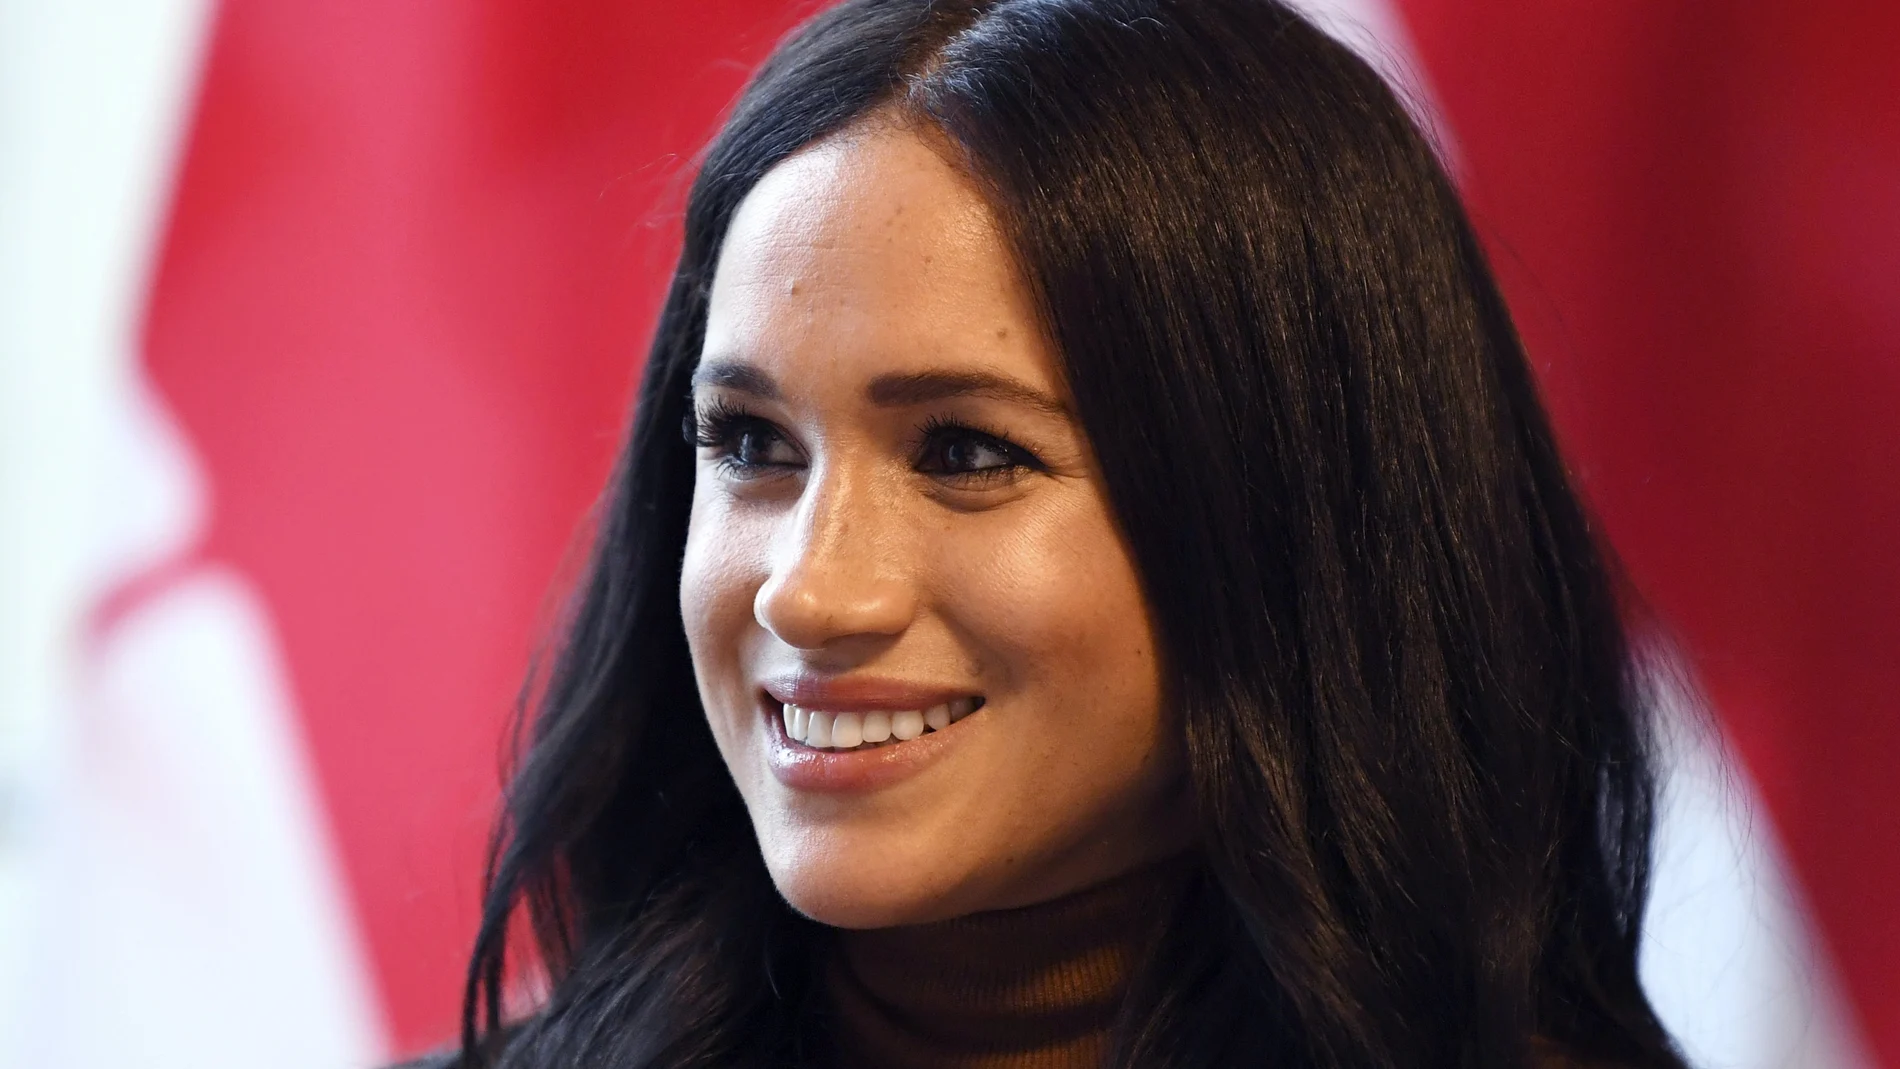 Britain's Meghan, Duchess of Sussex smiles during her visit with Prince Harry to Canada House in thanks for the warm Canadian hospitality and support they received during their recent stay in Canada, in London, Tuesday, Jan. 7, 2020. (Daniel Leal-Olivas/Pool Photo via AP)